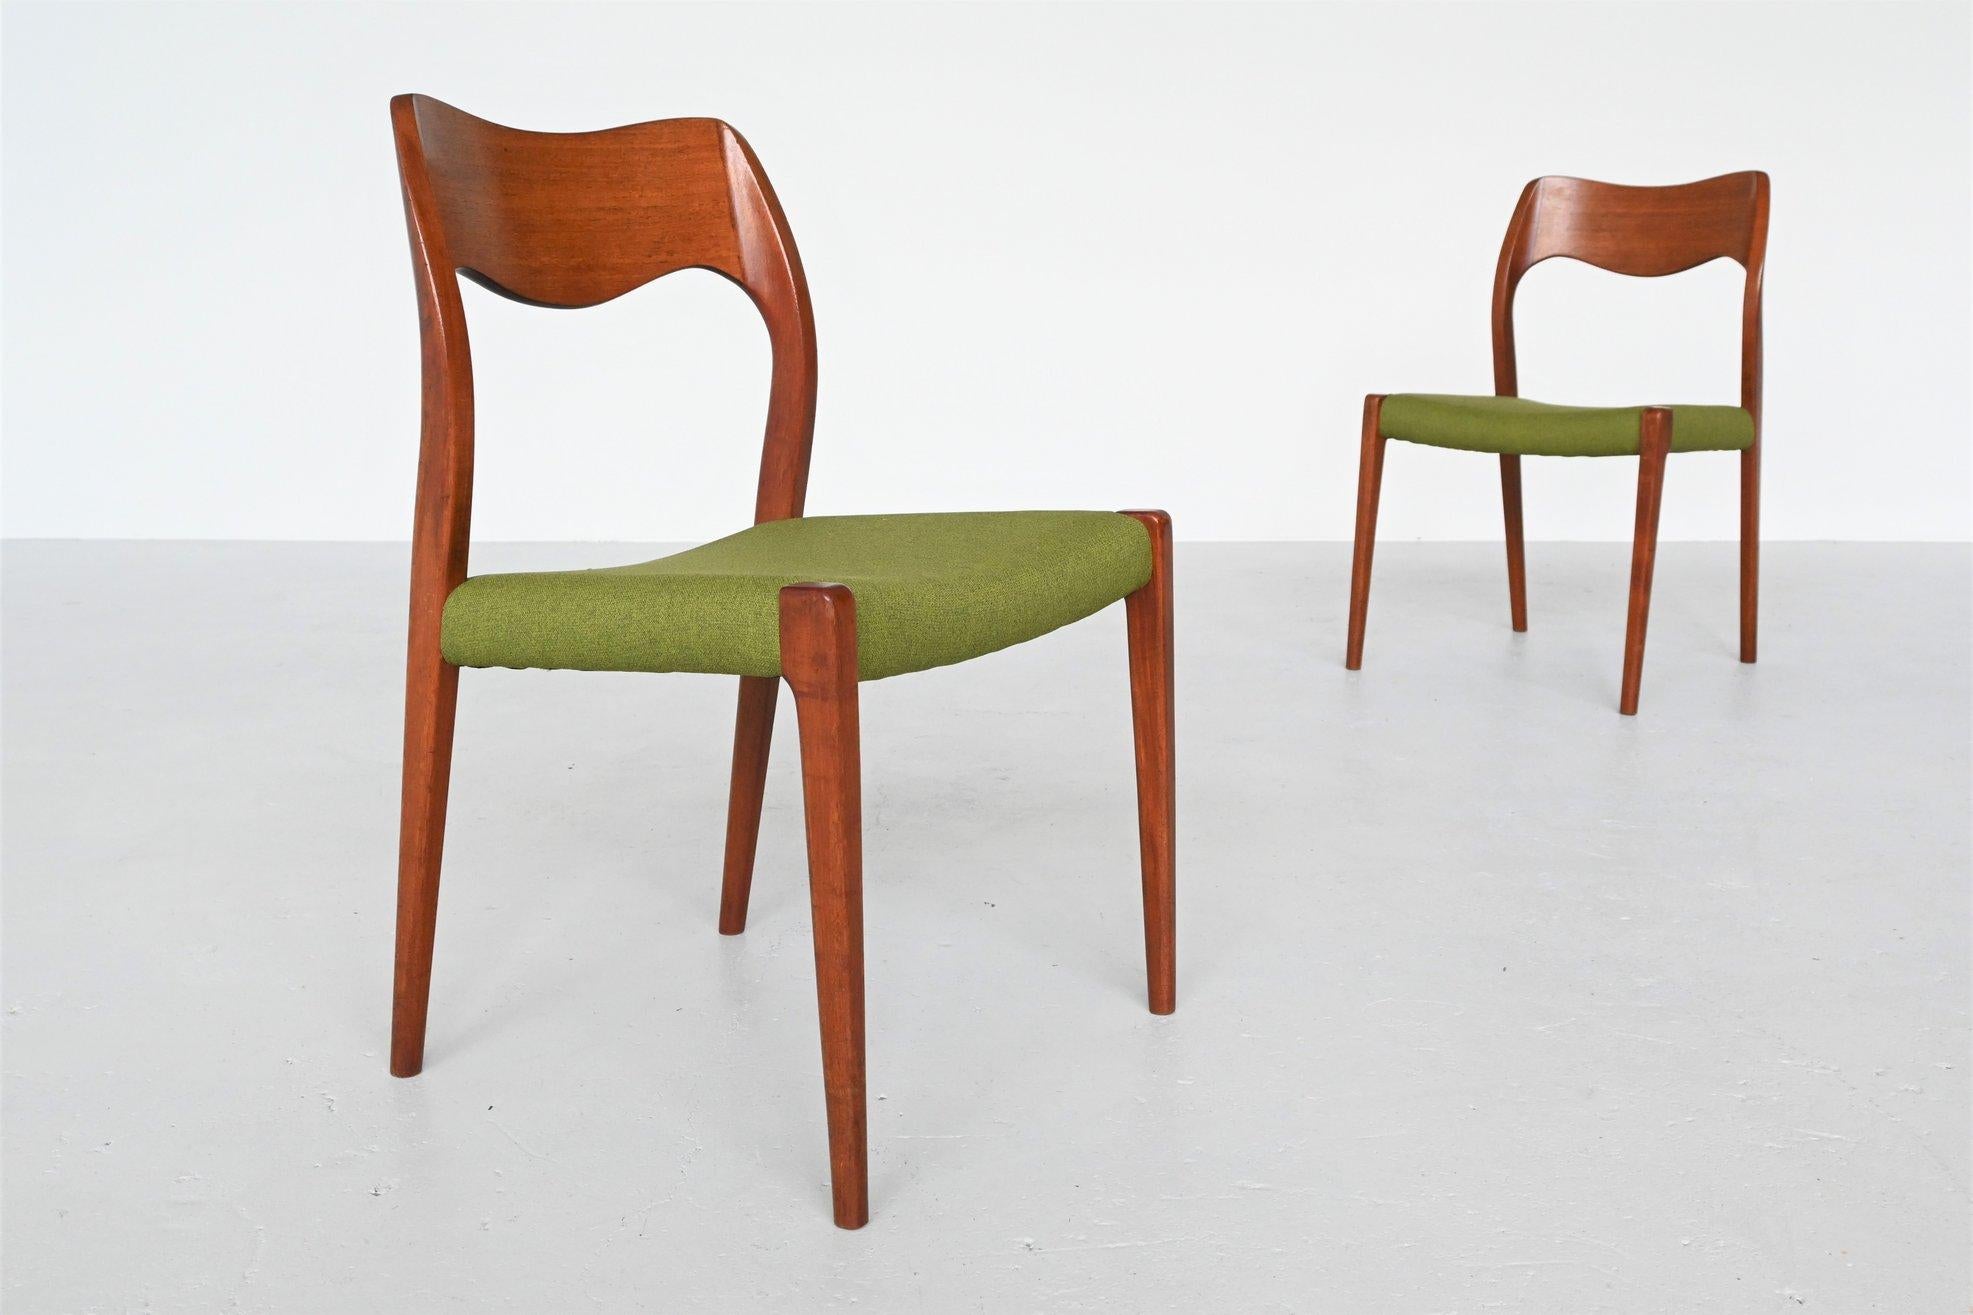 Very nice pair of dining chairs model 71 designed by Niels Otto Moller and manufactured by J.L. Møller Møbelfabrik, Denmark, 1951. These chairs are made of solid teak wood and newly upholstered with green high quality fabric. This natural green